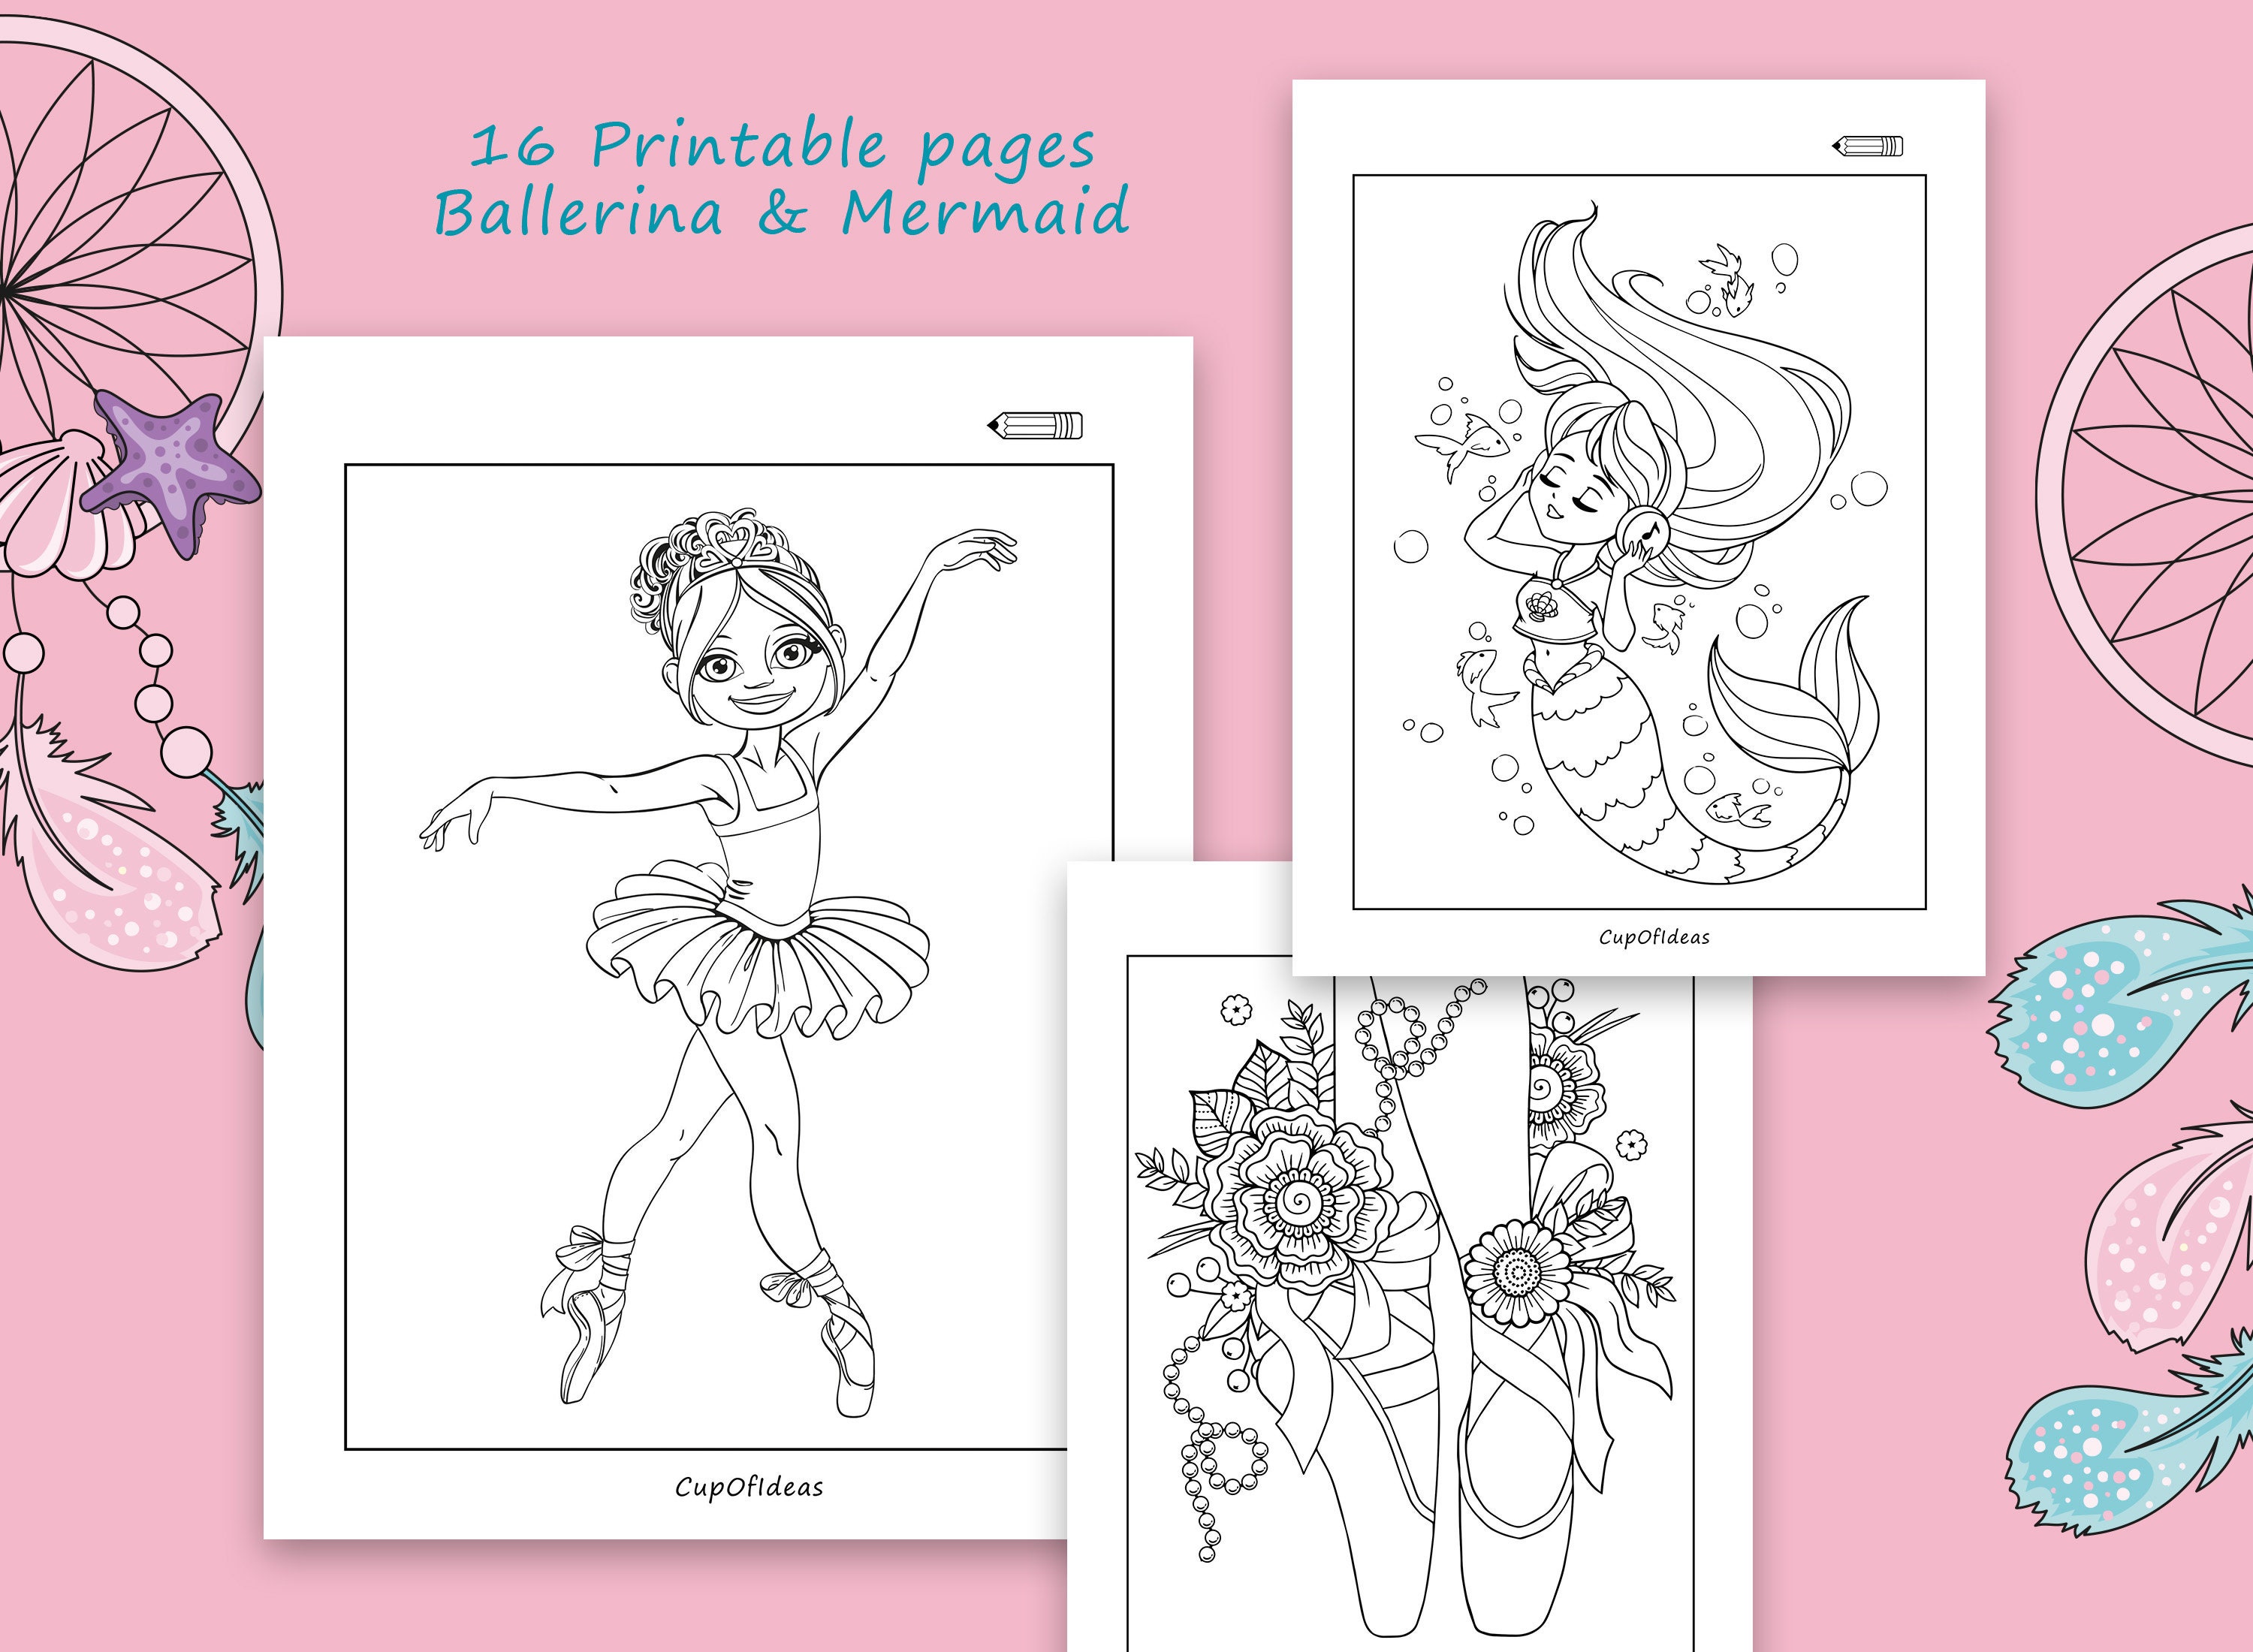 Mermaid & Ballerina coloring pages for kids Activity and | Etsy